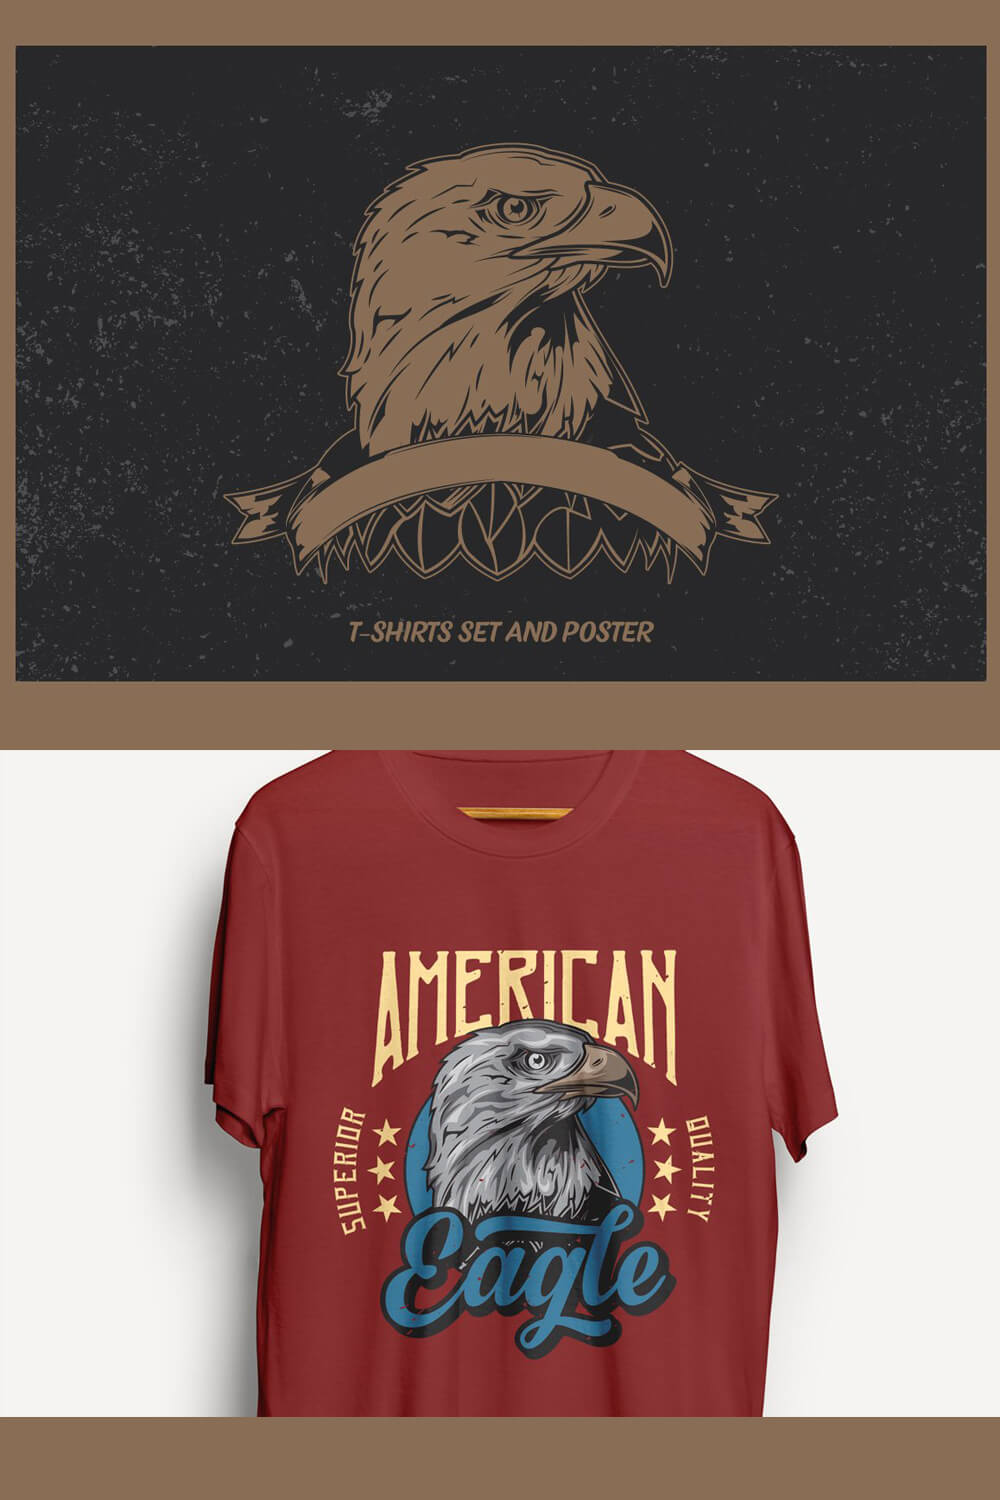 The large picture is divided into two parts, T-shirts and an eagle poster.